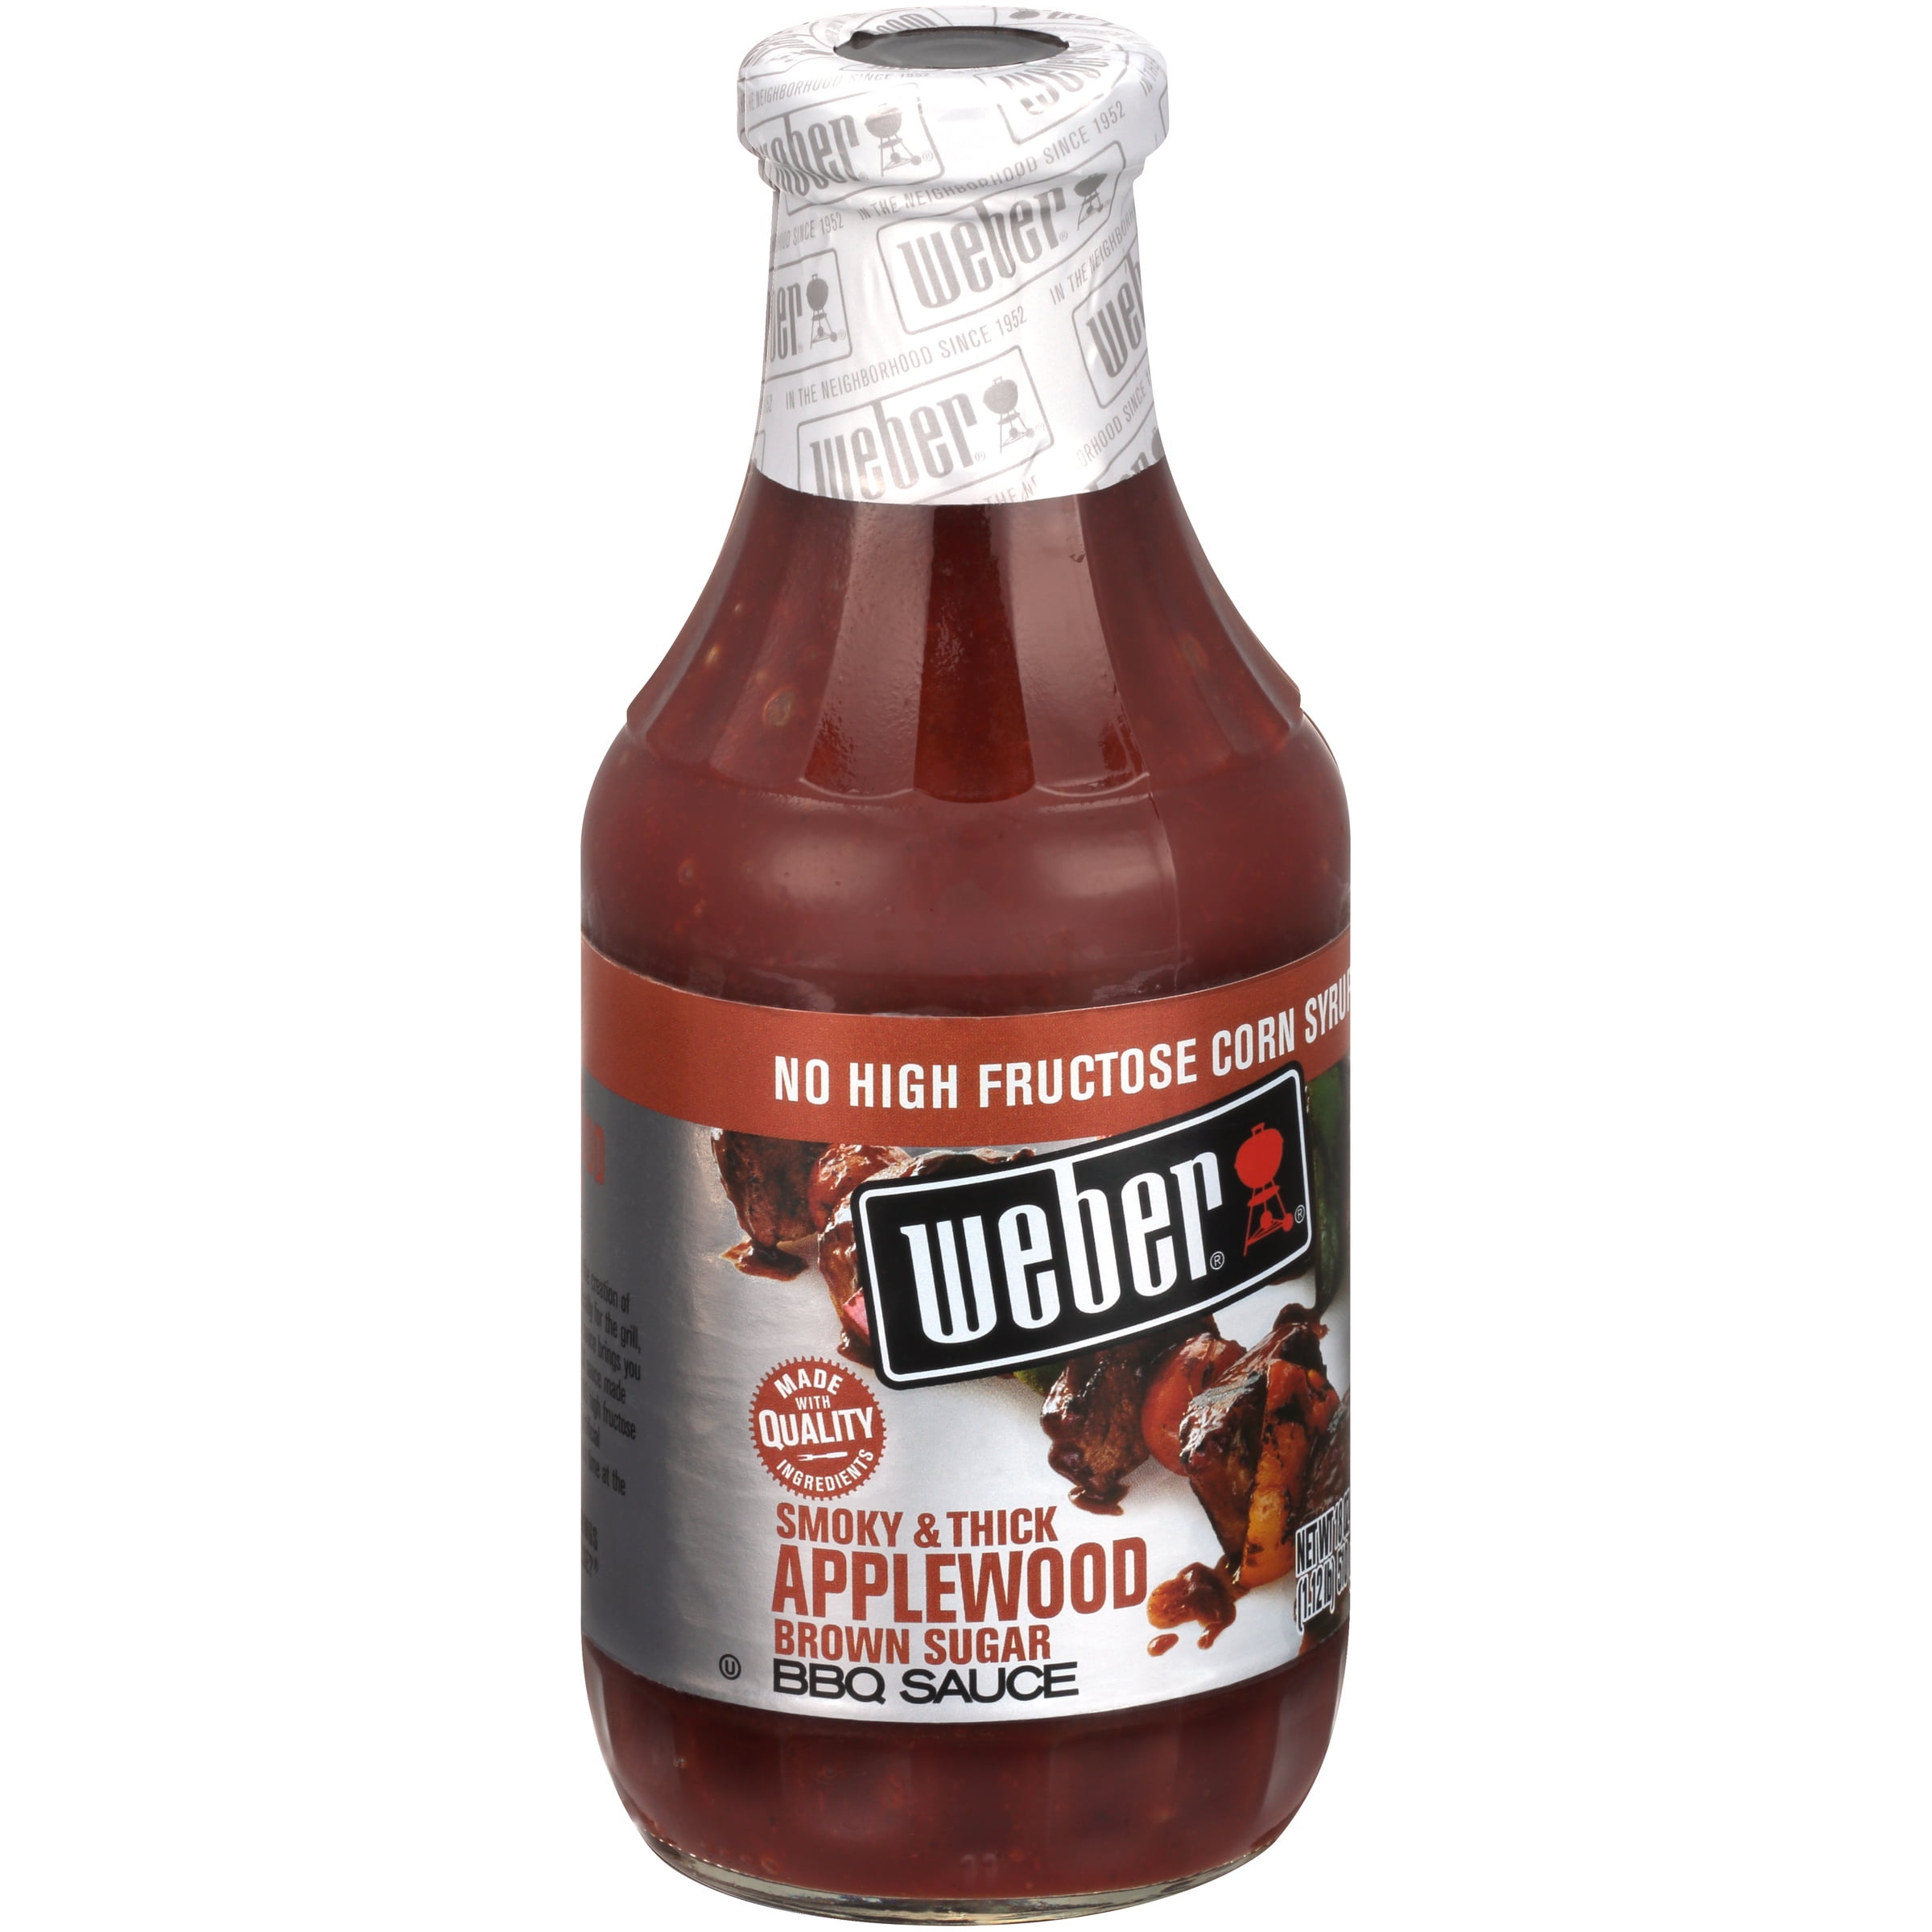 NEW for summer 2022 grilling 🔥🍯 Hot Honey Weber Seasoning is packed with  smoky paprika, brown sugar, and honey! Now exclusively at Sam's Club 👉, By Weber Sauces & Seasonings